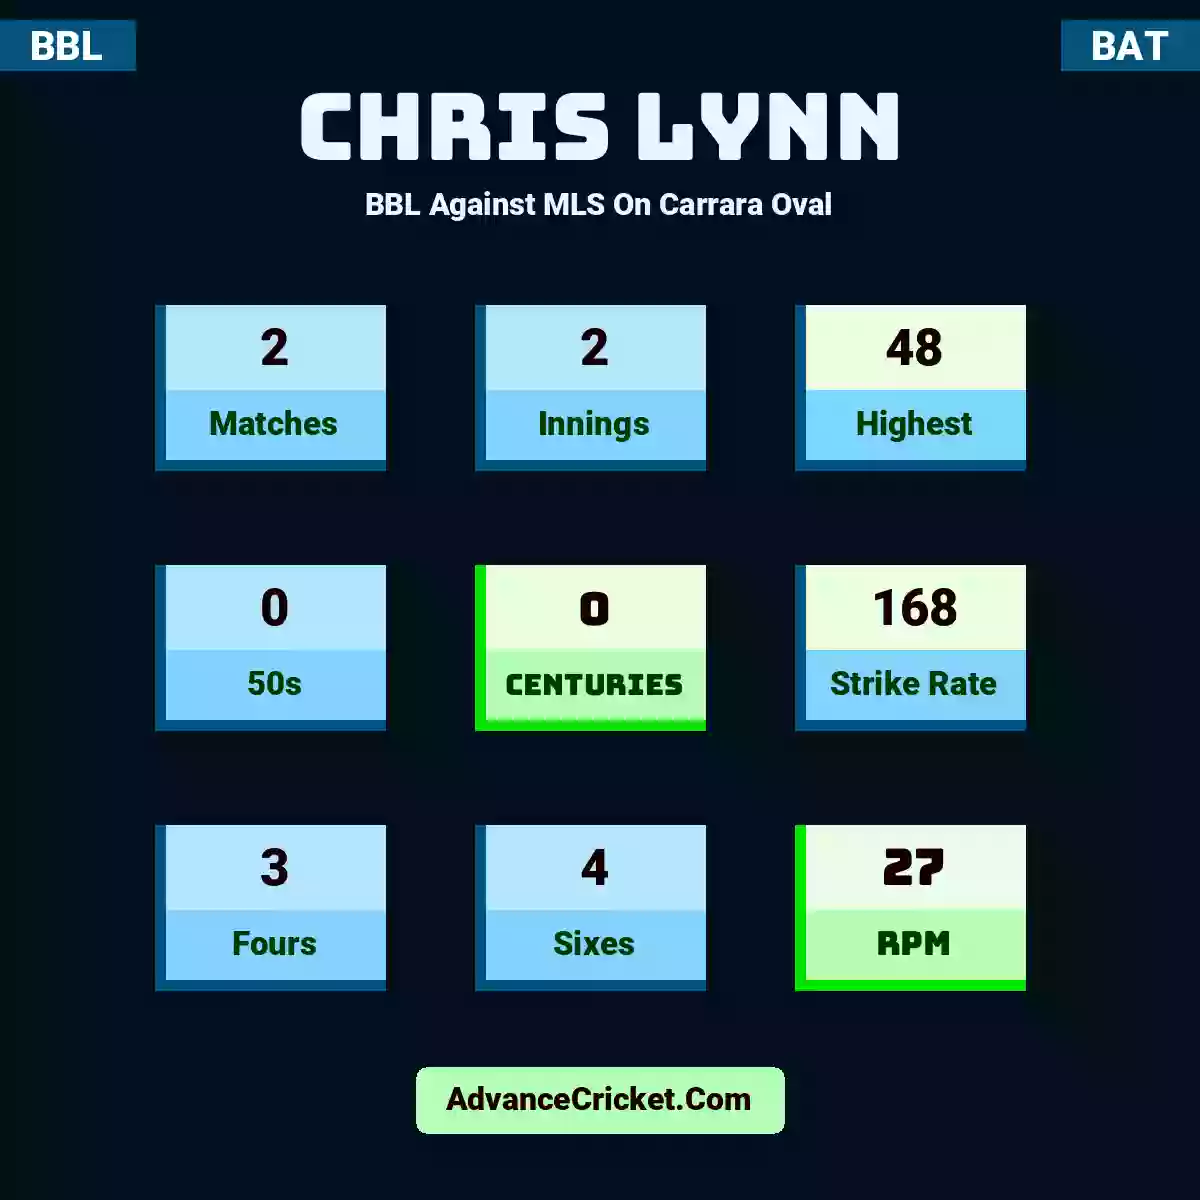 Chris Lynn BBL  Against MLS On Carrara Oval, Chris Lynn played 2 matches, scored 48 runs as highest, 0 half-centuries, and 0 centuries, with a strike rate of 168. C.Lynn hit 3 fours and 4 sixes, with an RPM of 27.